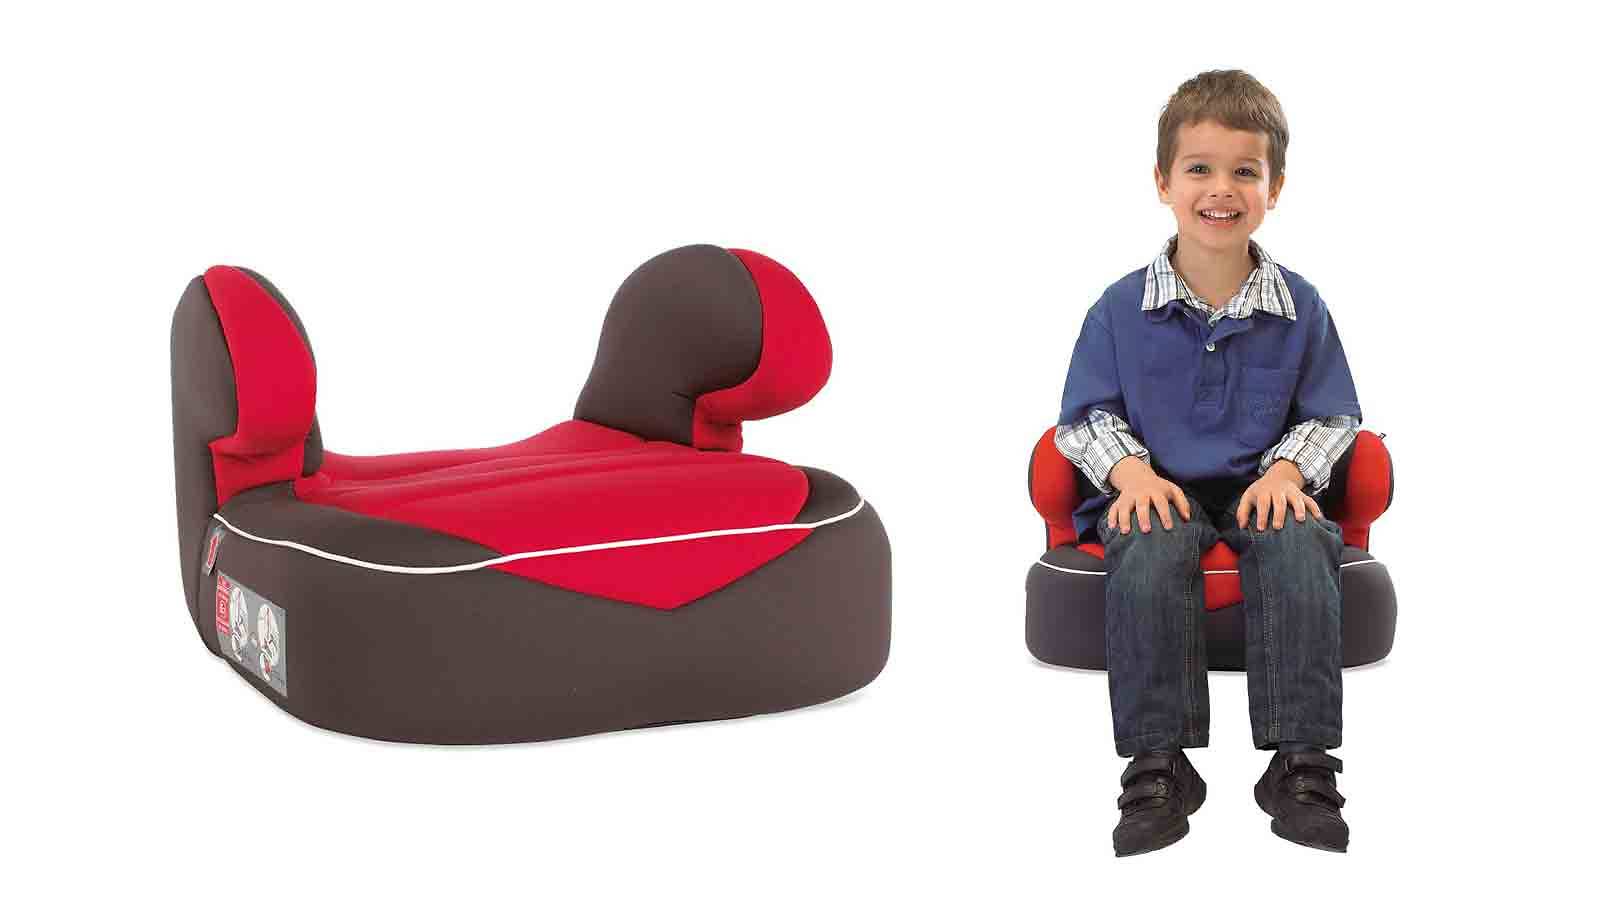 MOTHERCARE-DREAM-BOOSTER-SEAT